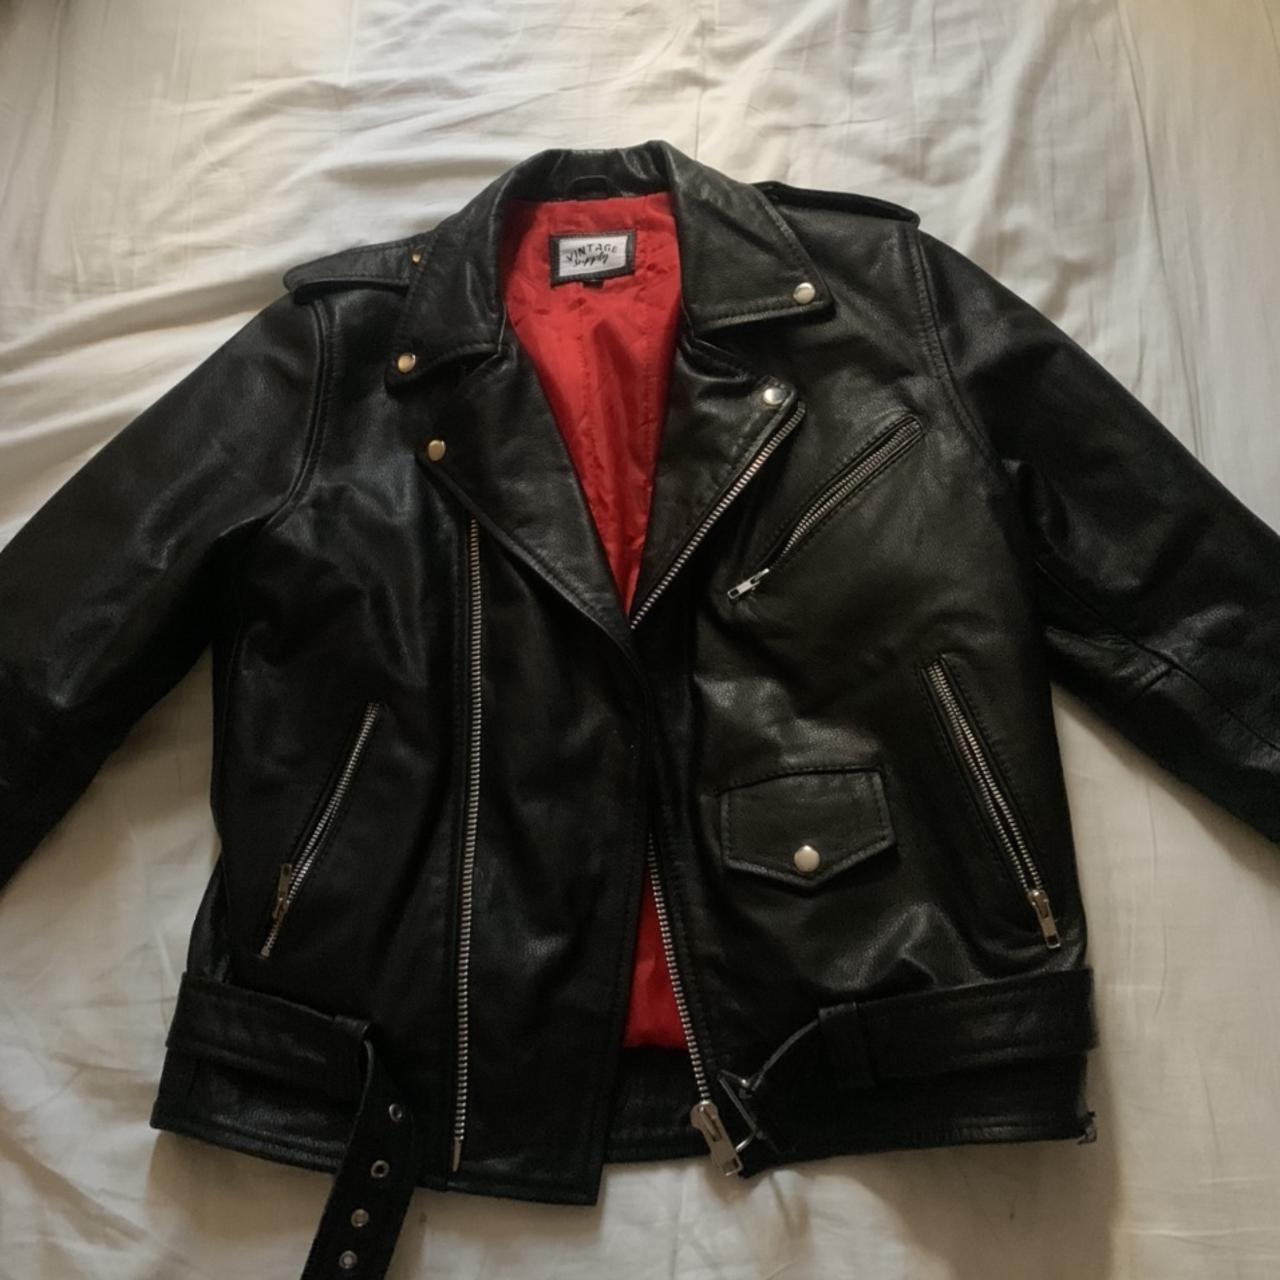 Leather Jacket, price is with pins included. Pins - Depop